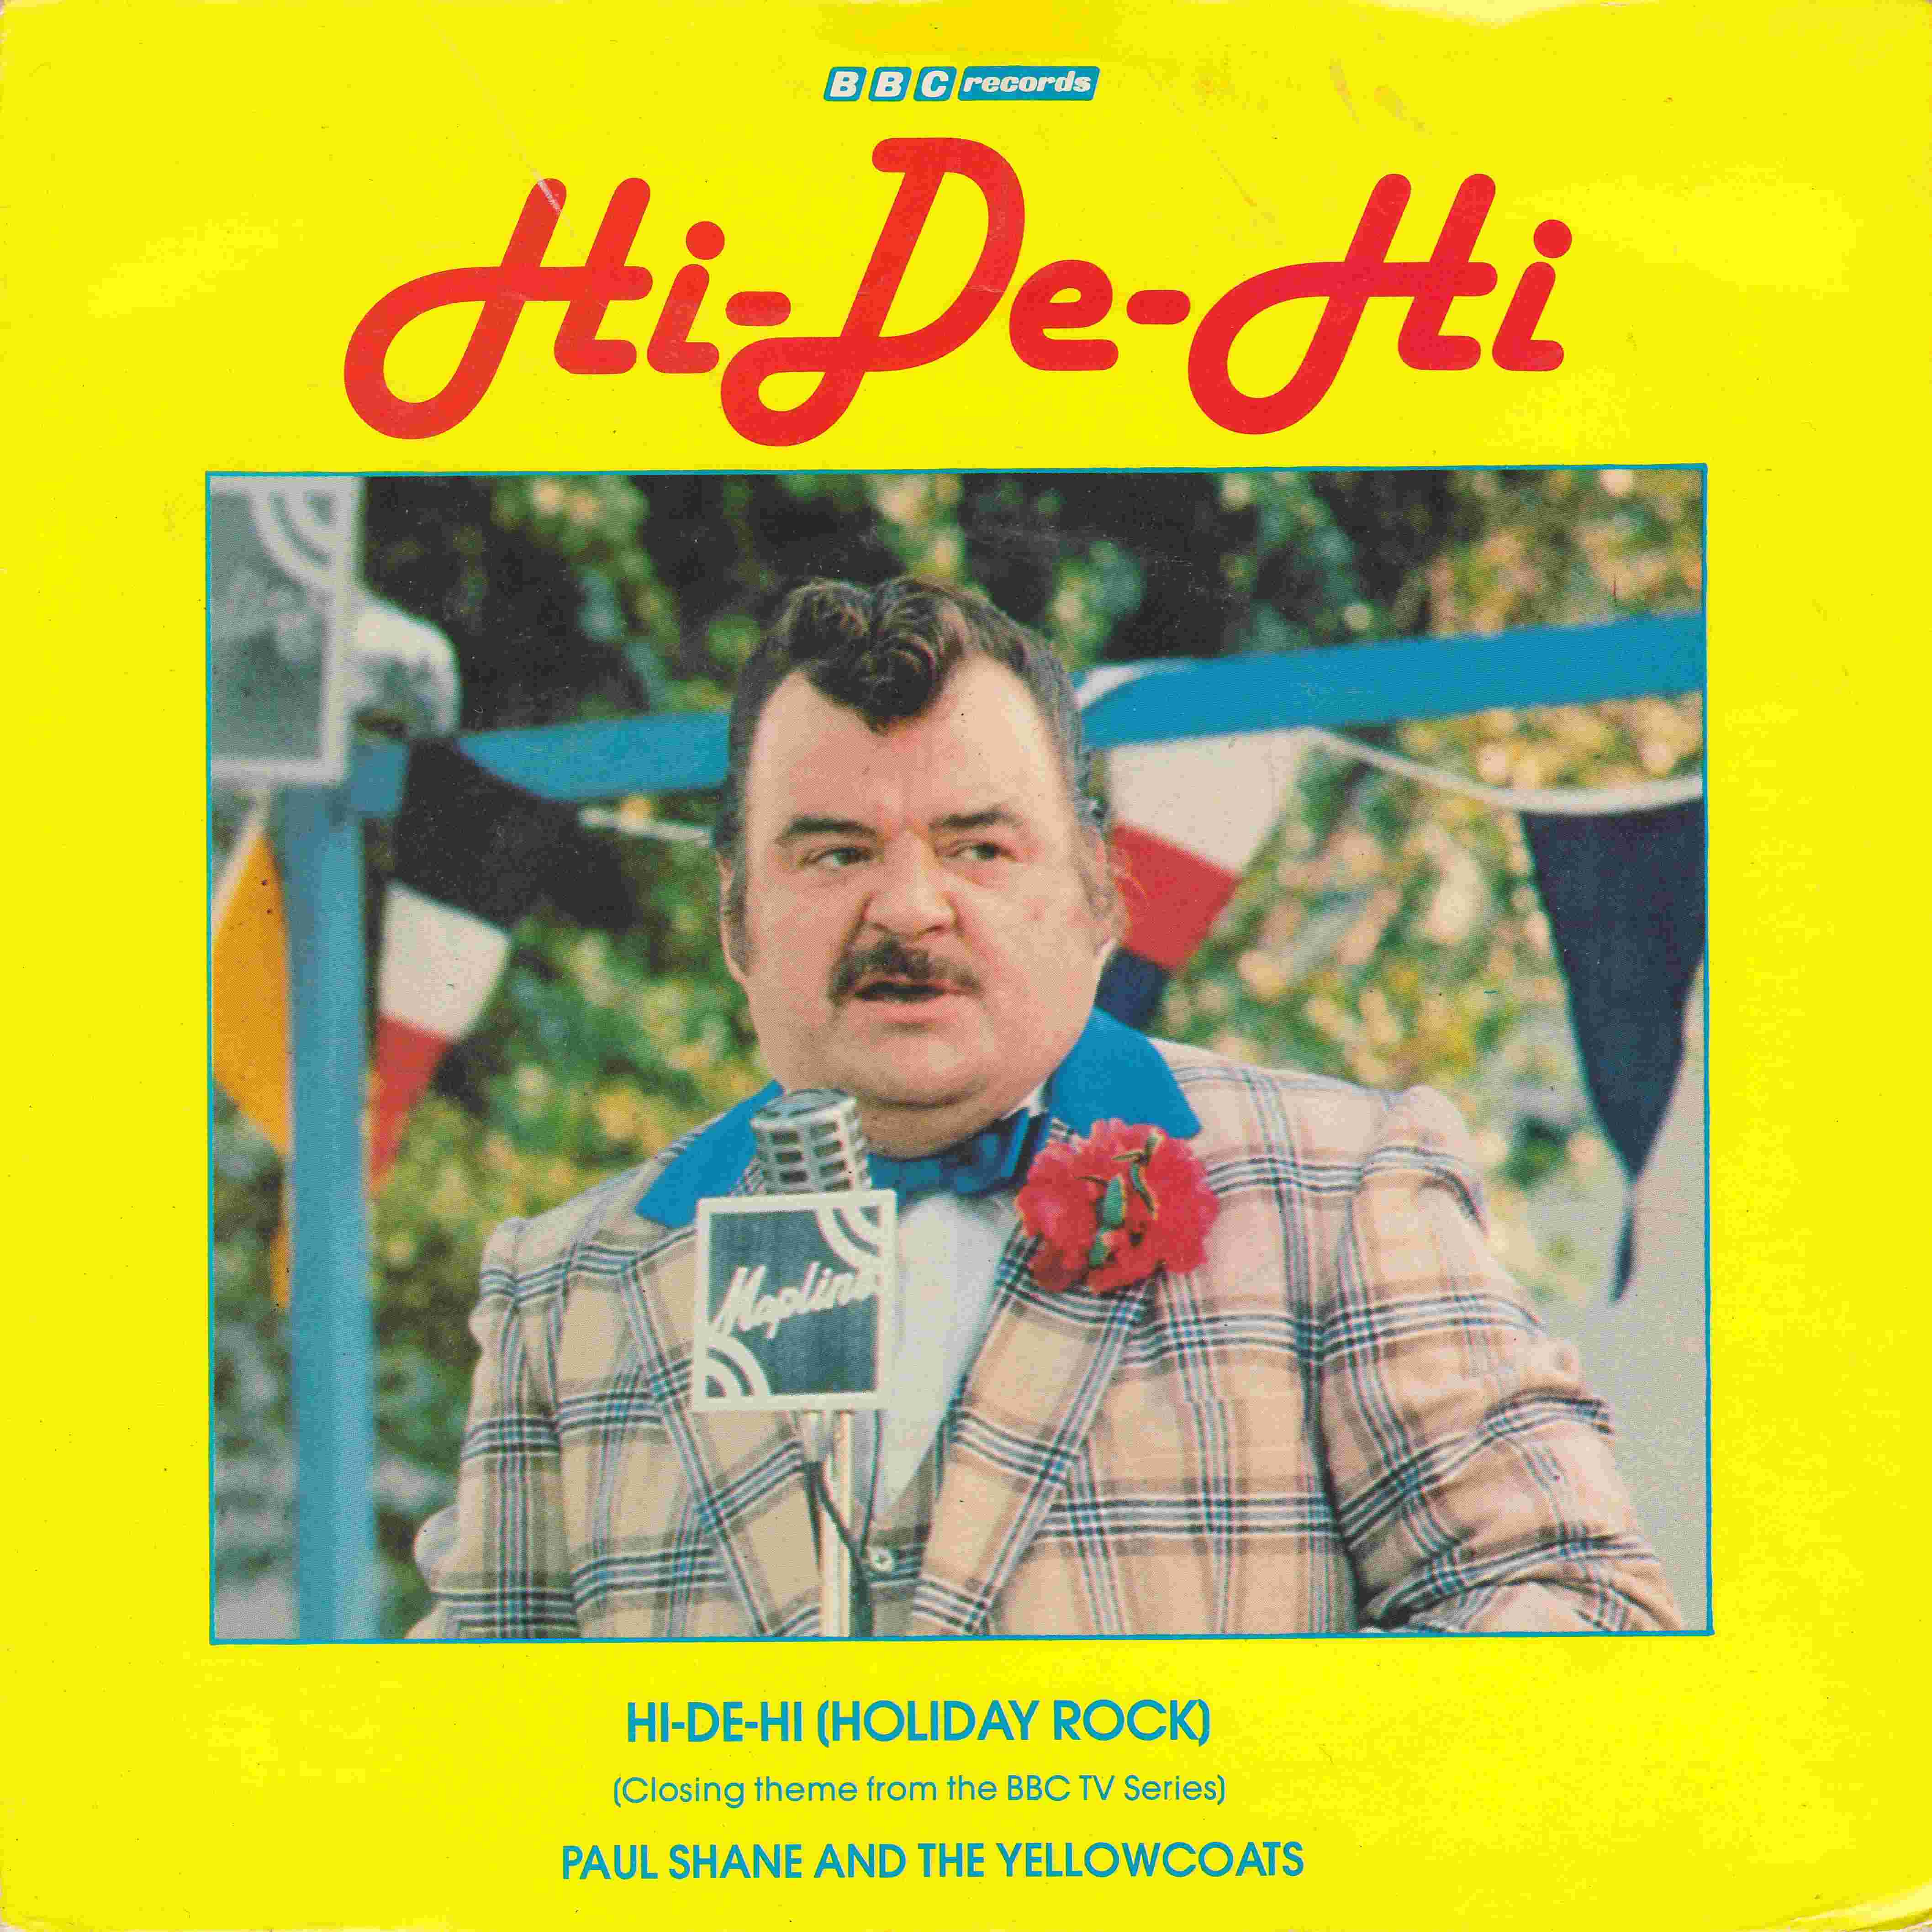 Picture of RESL 103 Holiday rock (Hi-de-hi) by artist Jimmy Perry / Paul Greedus / Paul Shane from the BBC singles - Records and Tapes library